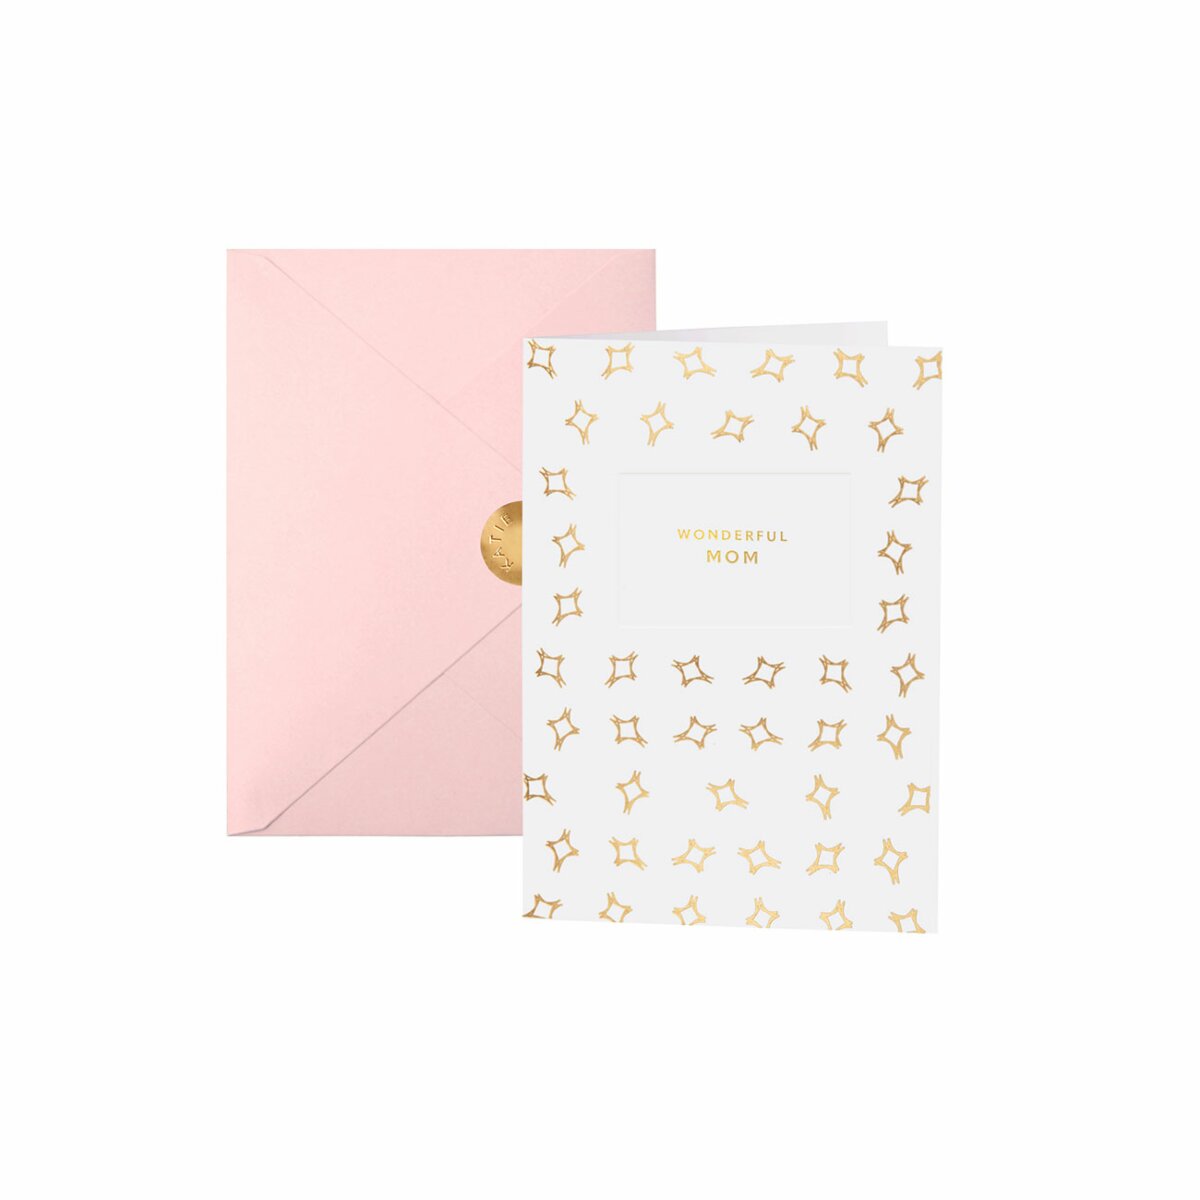 WORDS ARE GOLDEN GREETING CARDS | WONDERFUL MOM